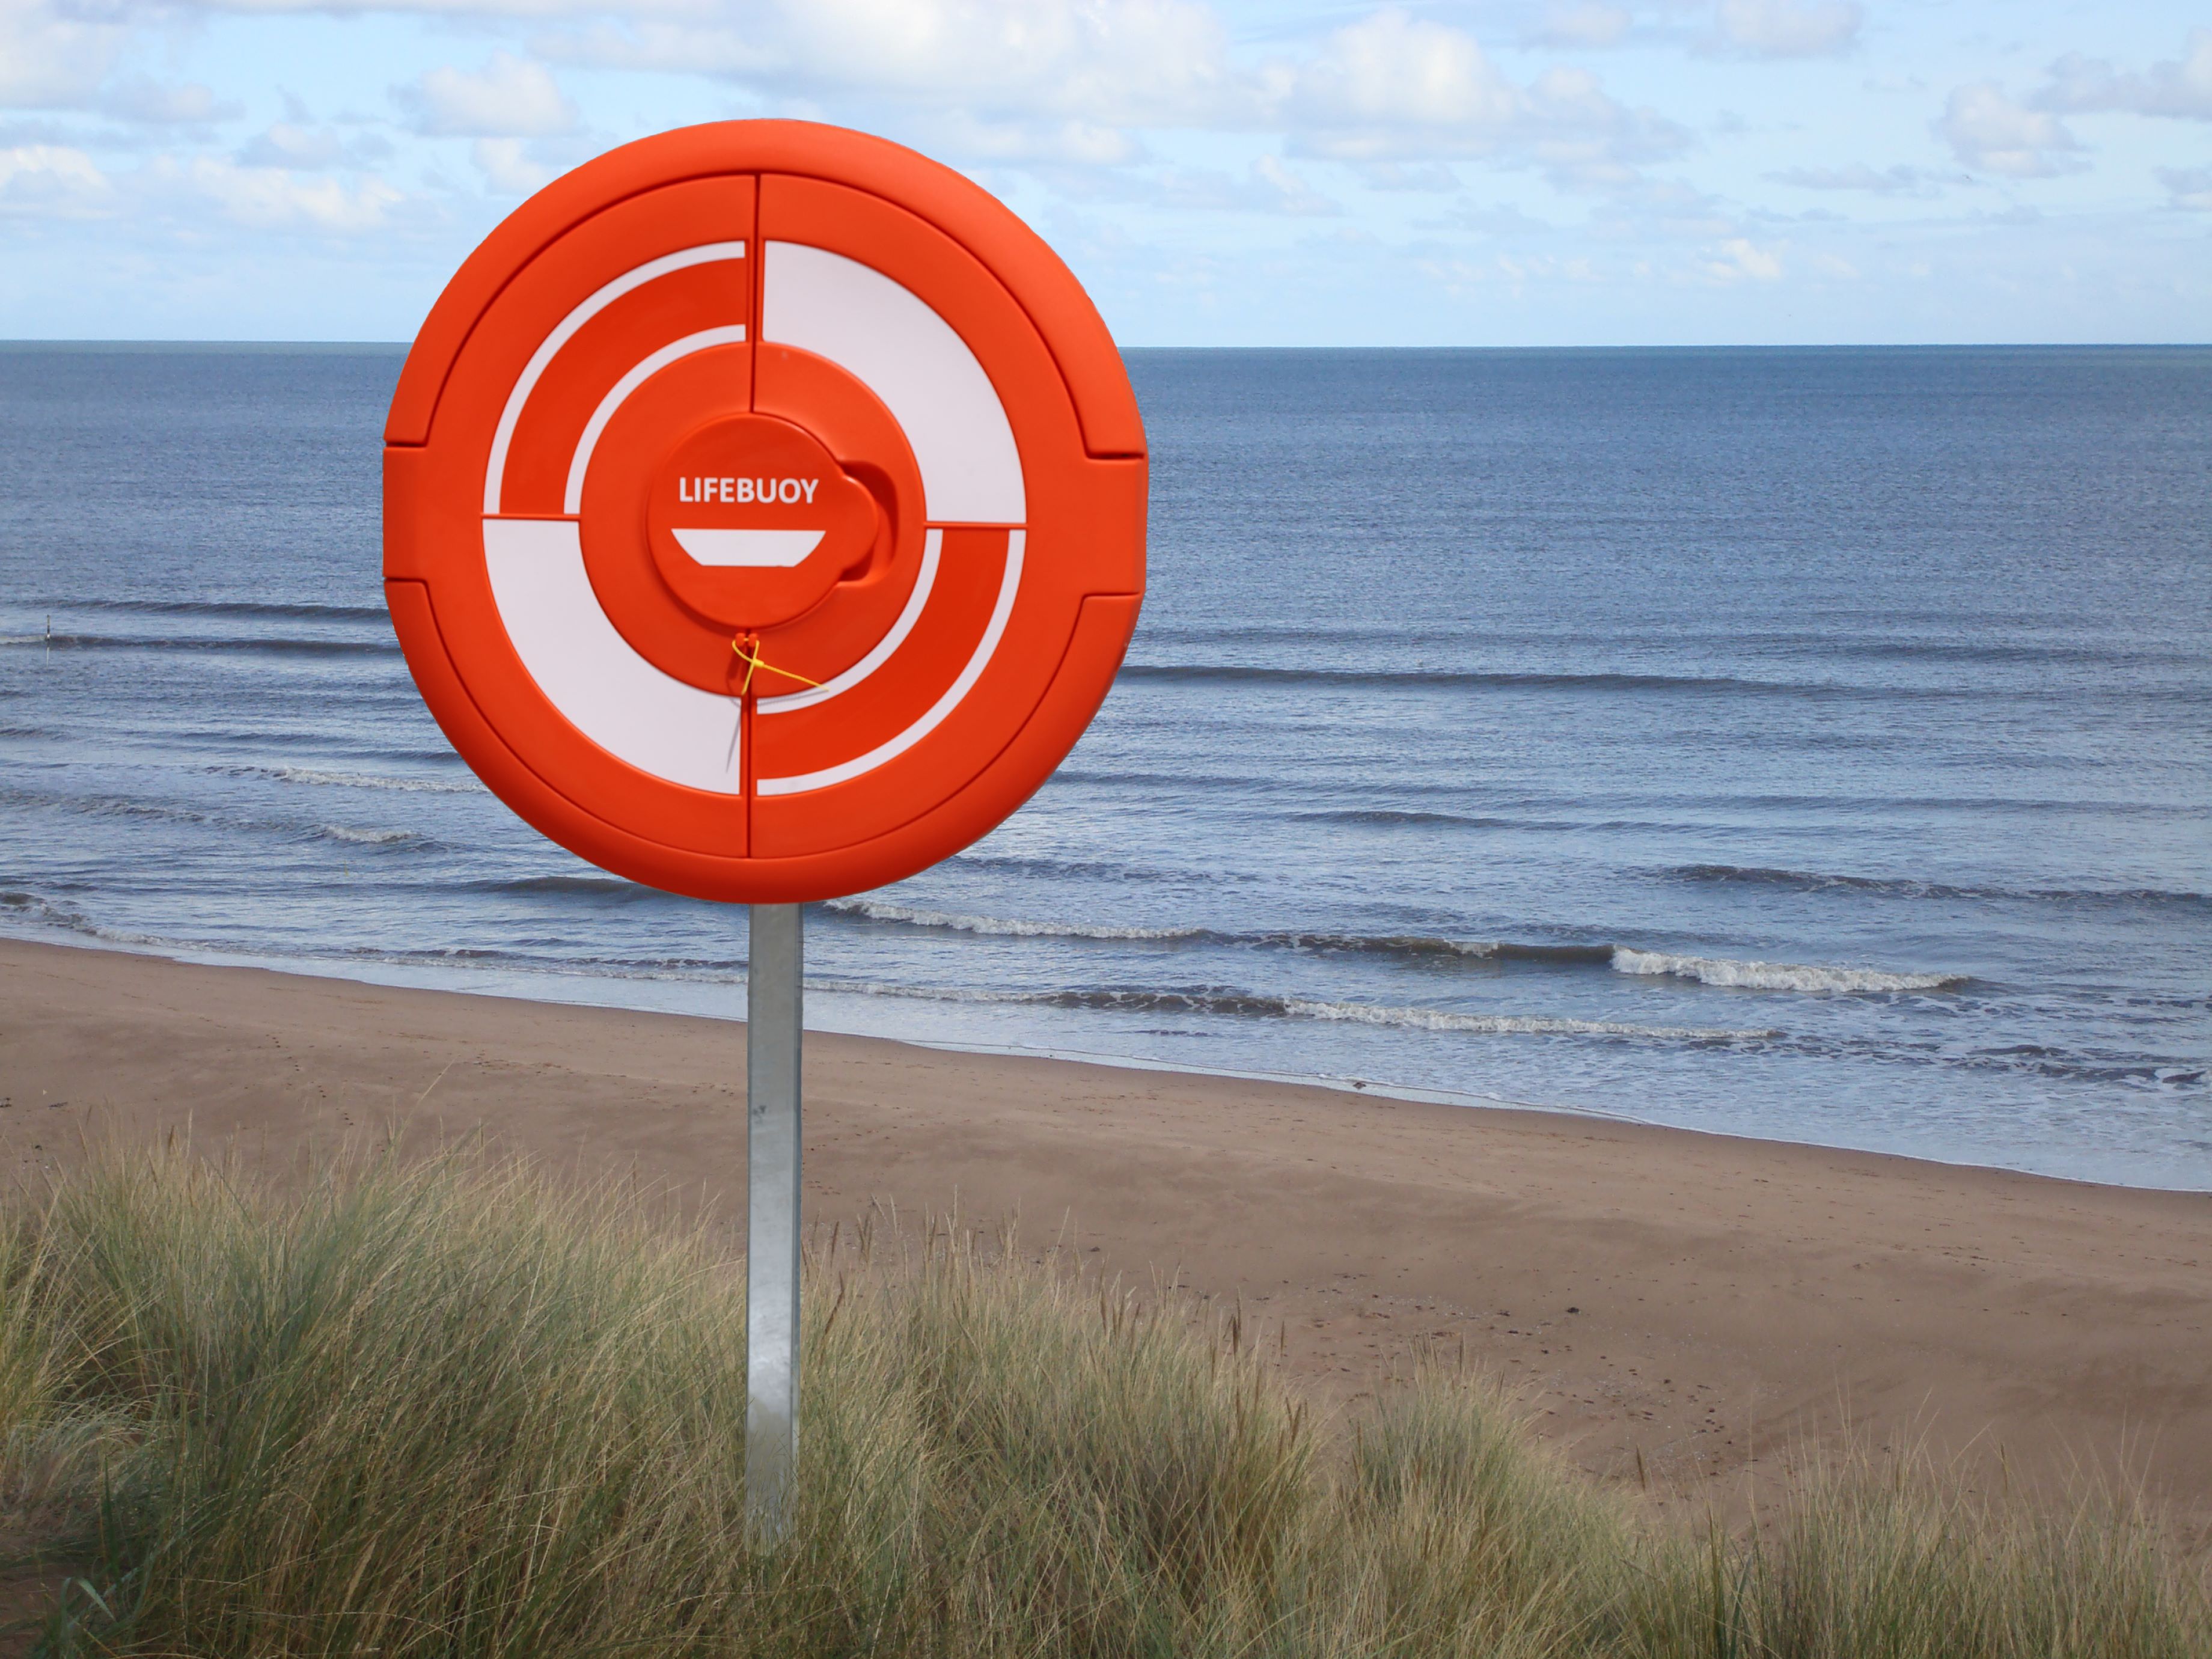 Soft-Surface Lifebuoy Housing/Cabinet mounted above a beach, providing accessible safety equipment in a coastal setting.